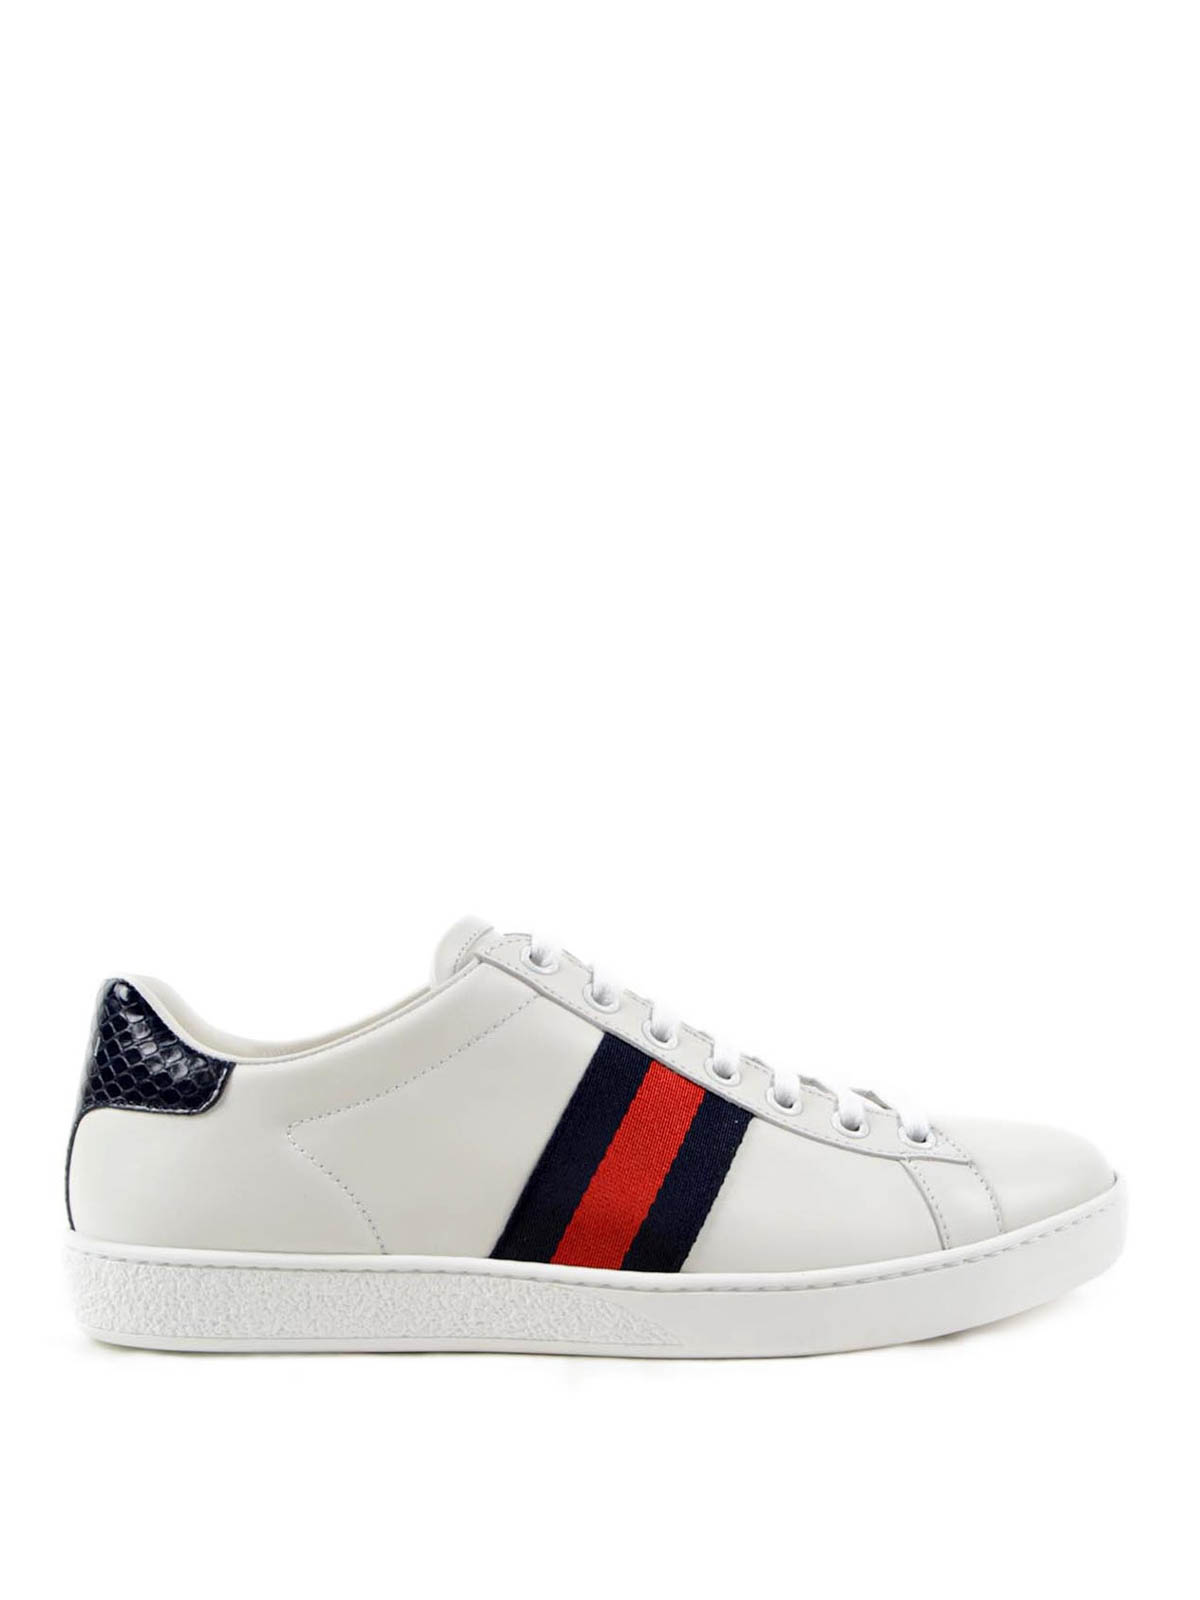 Gucci - Ace leather sneakers - trainers - 387993 A38D0 9072 | 0